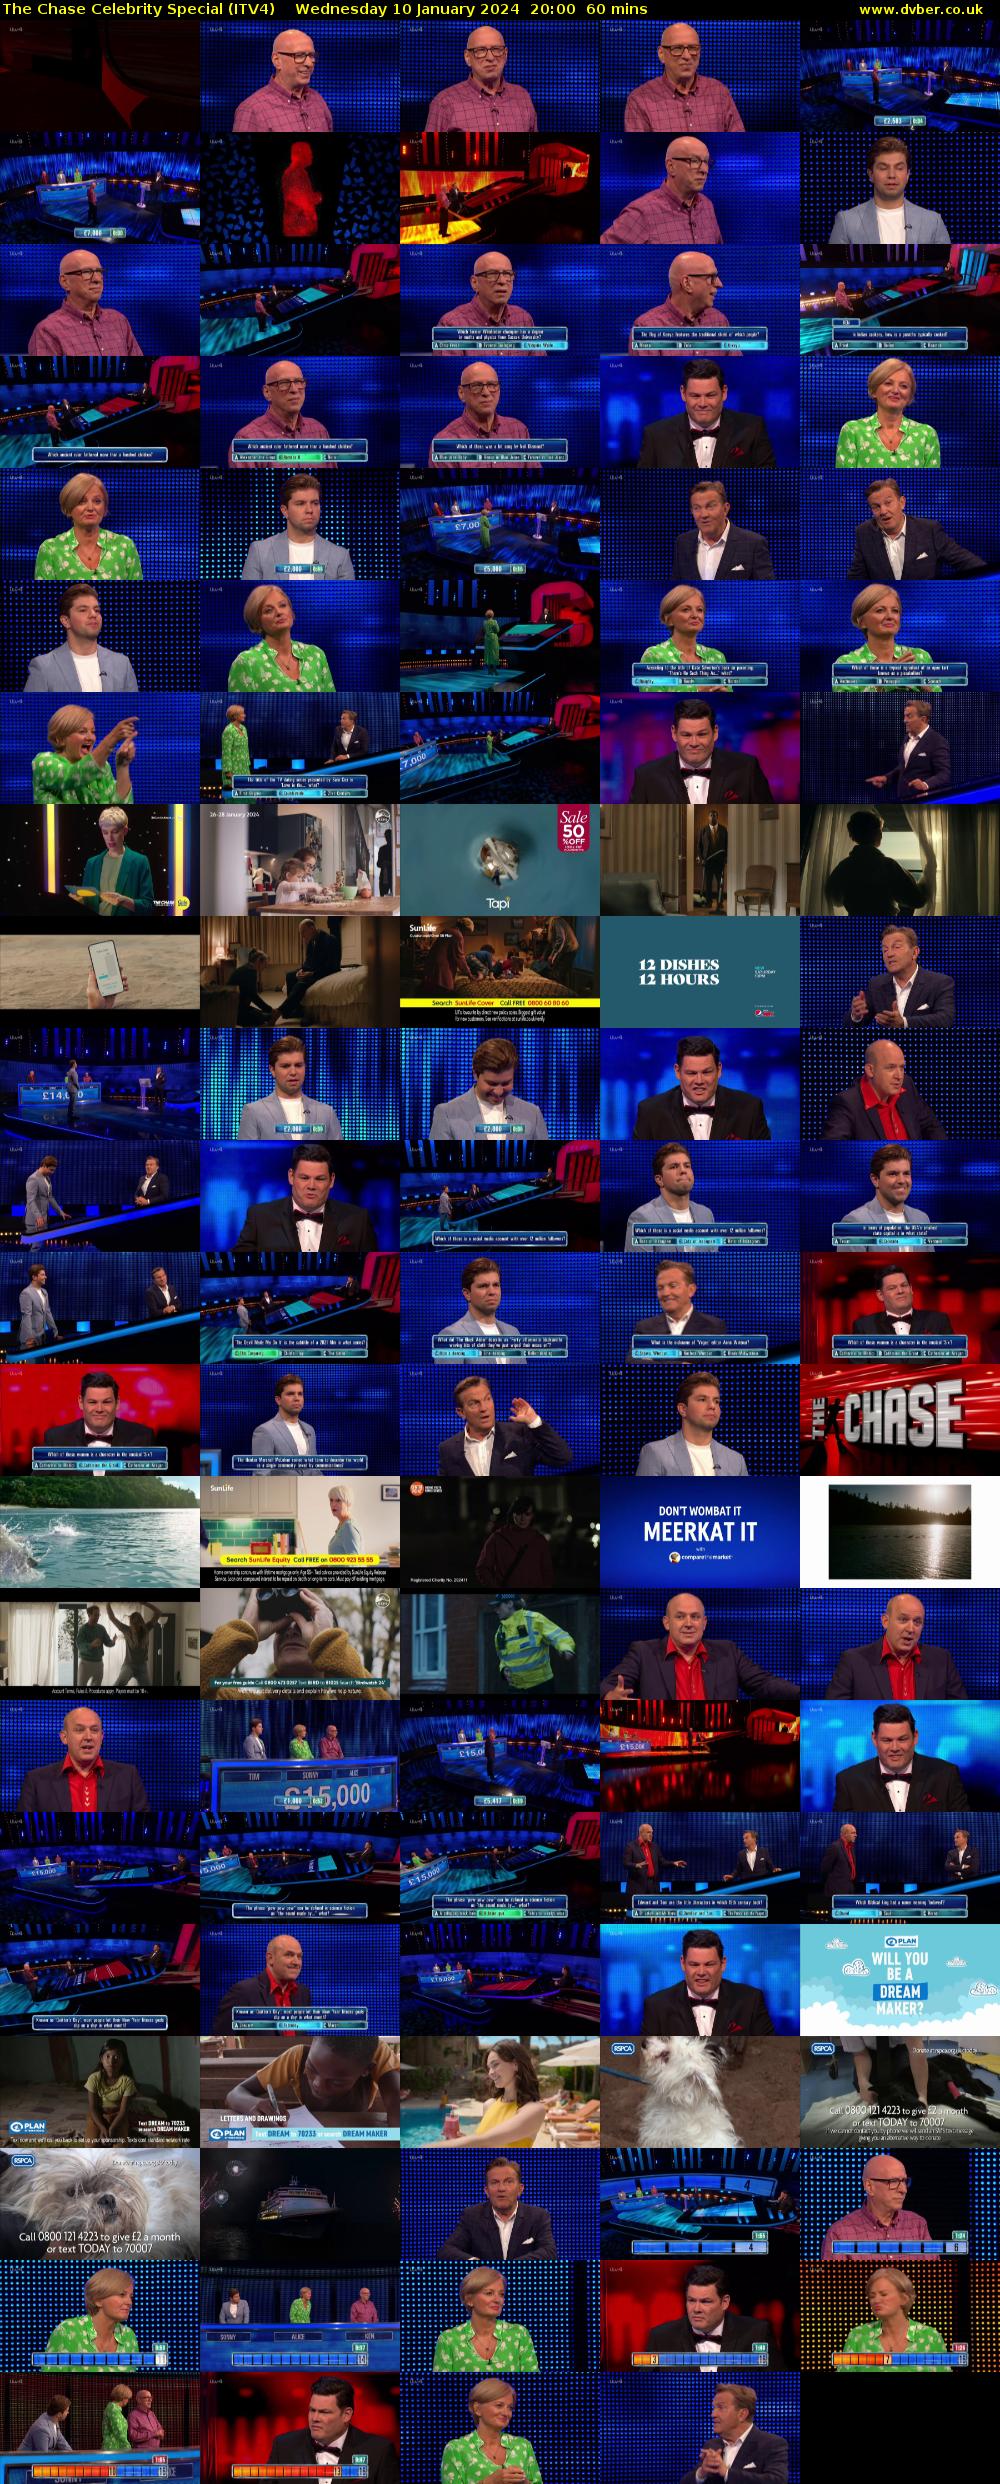 The Chase Celebrity Special (ITV4) Wednesday 10 January 2024 20:00 - 21:00